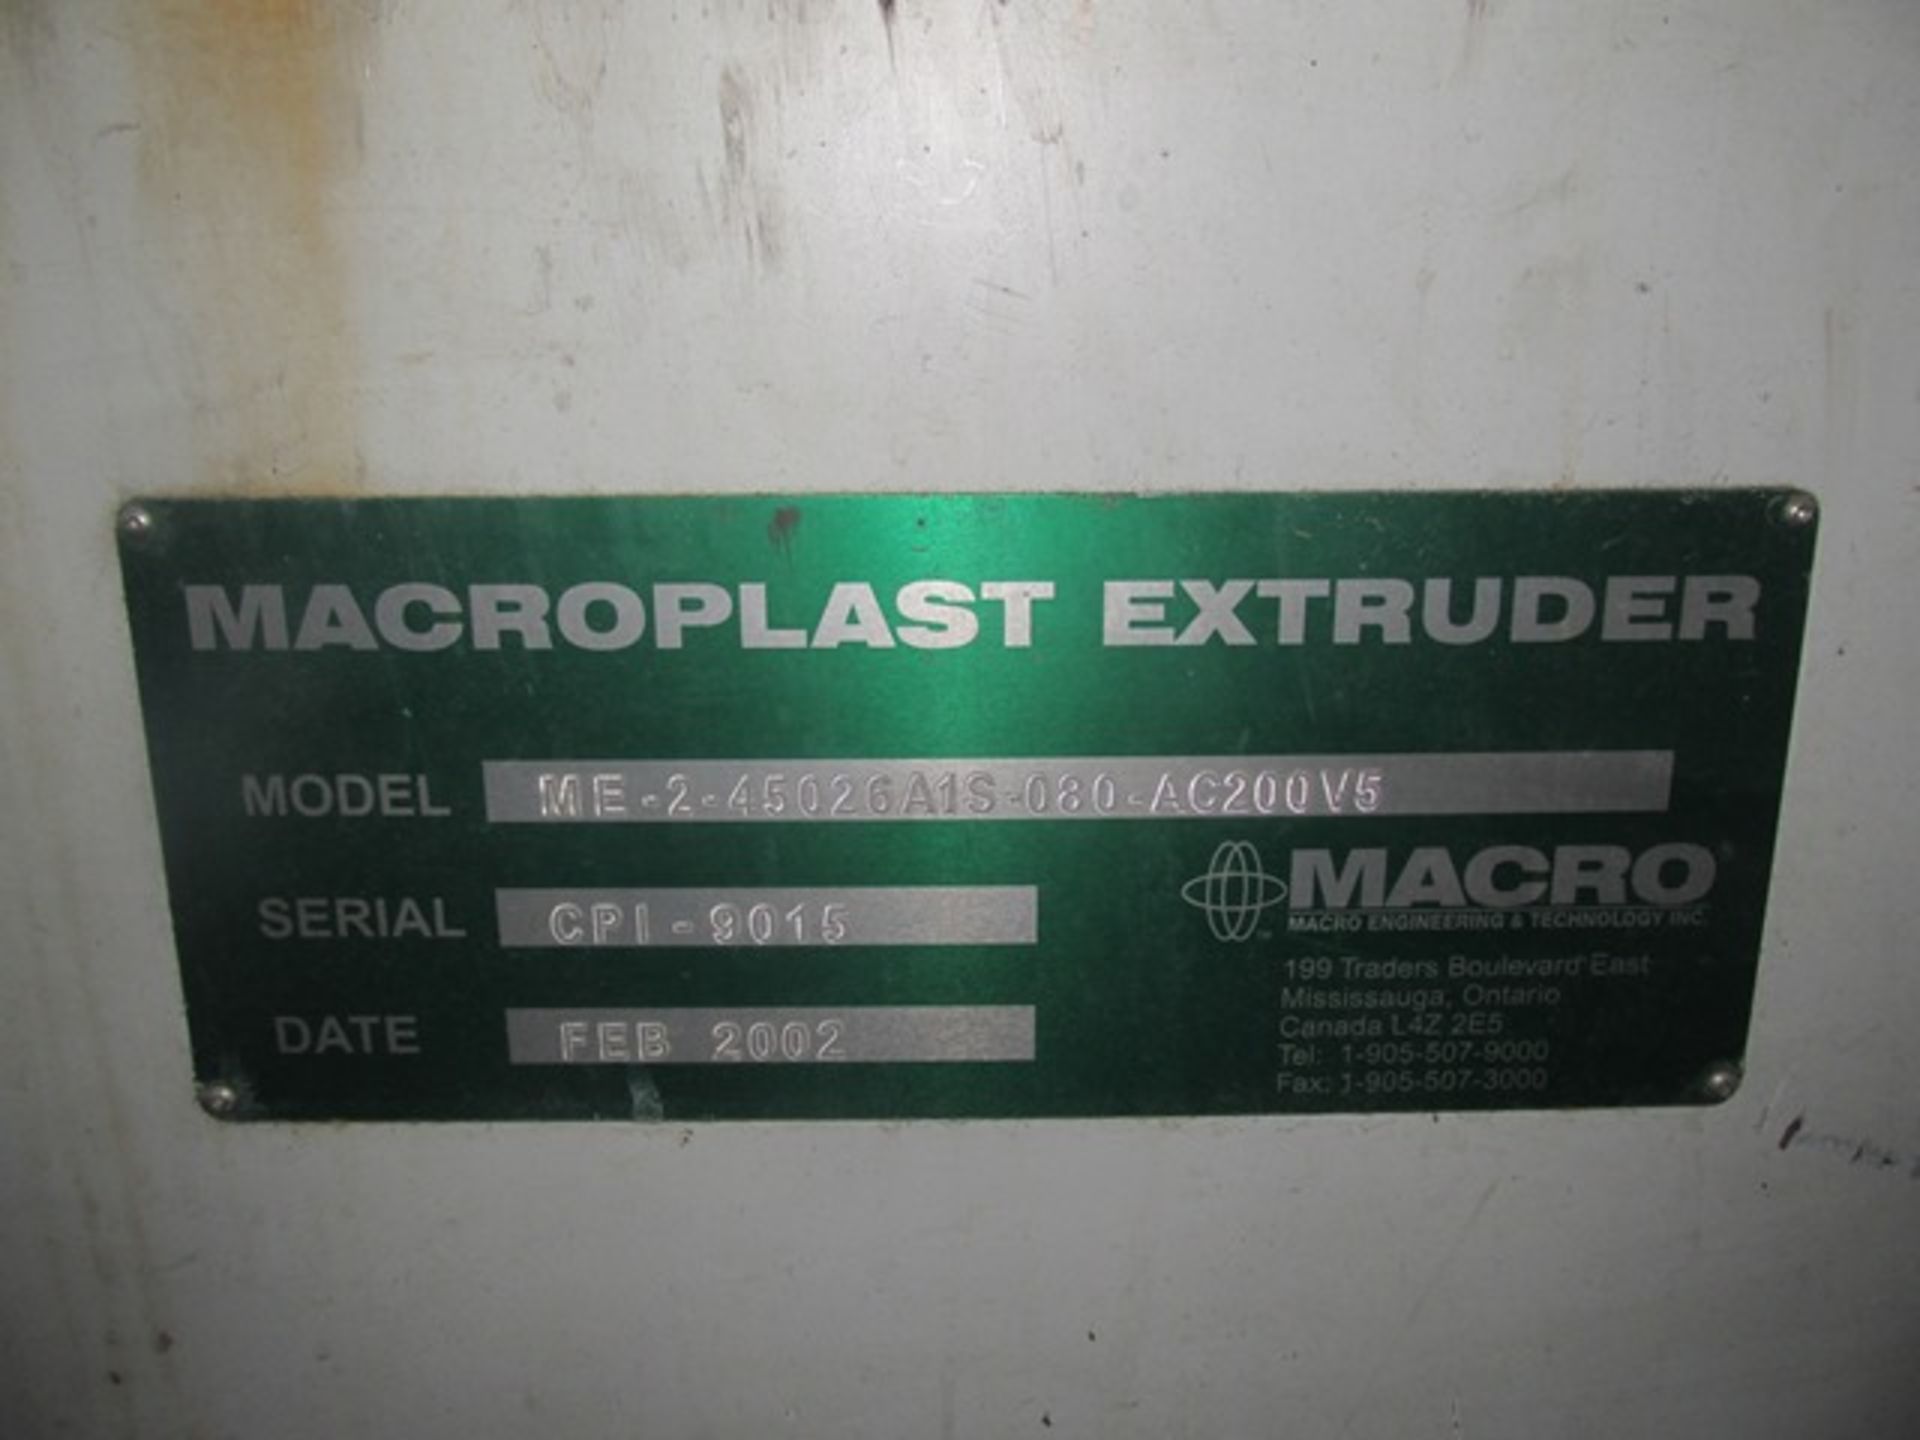 Macroplast Extrusion Tecnology 3" extruder, model ME-2-45026A1S-080-AC200V5, 36:1 L/D, electrically - Image 13 of 14